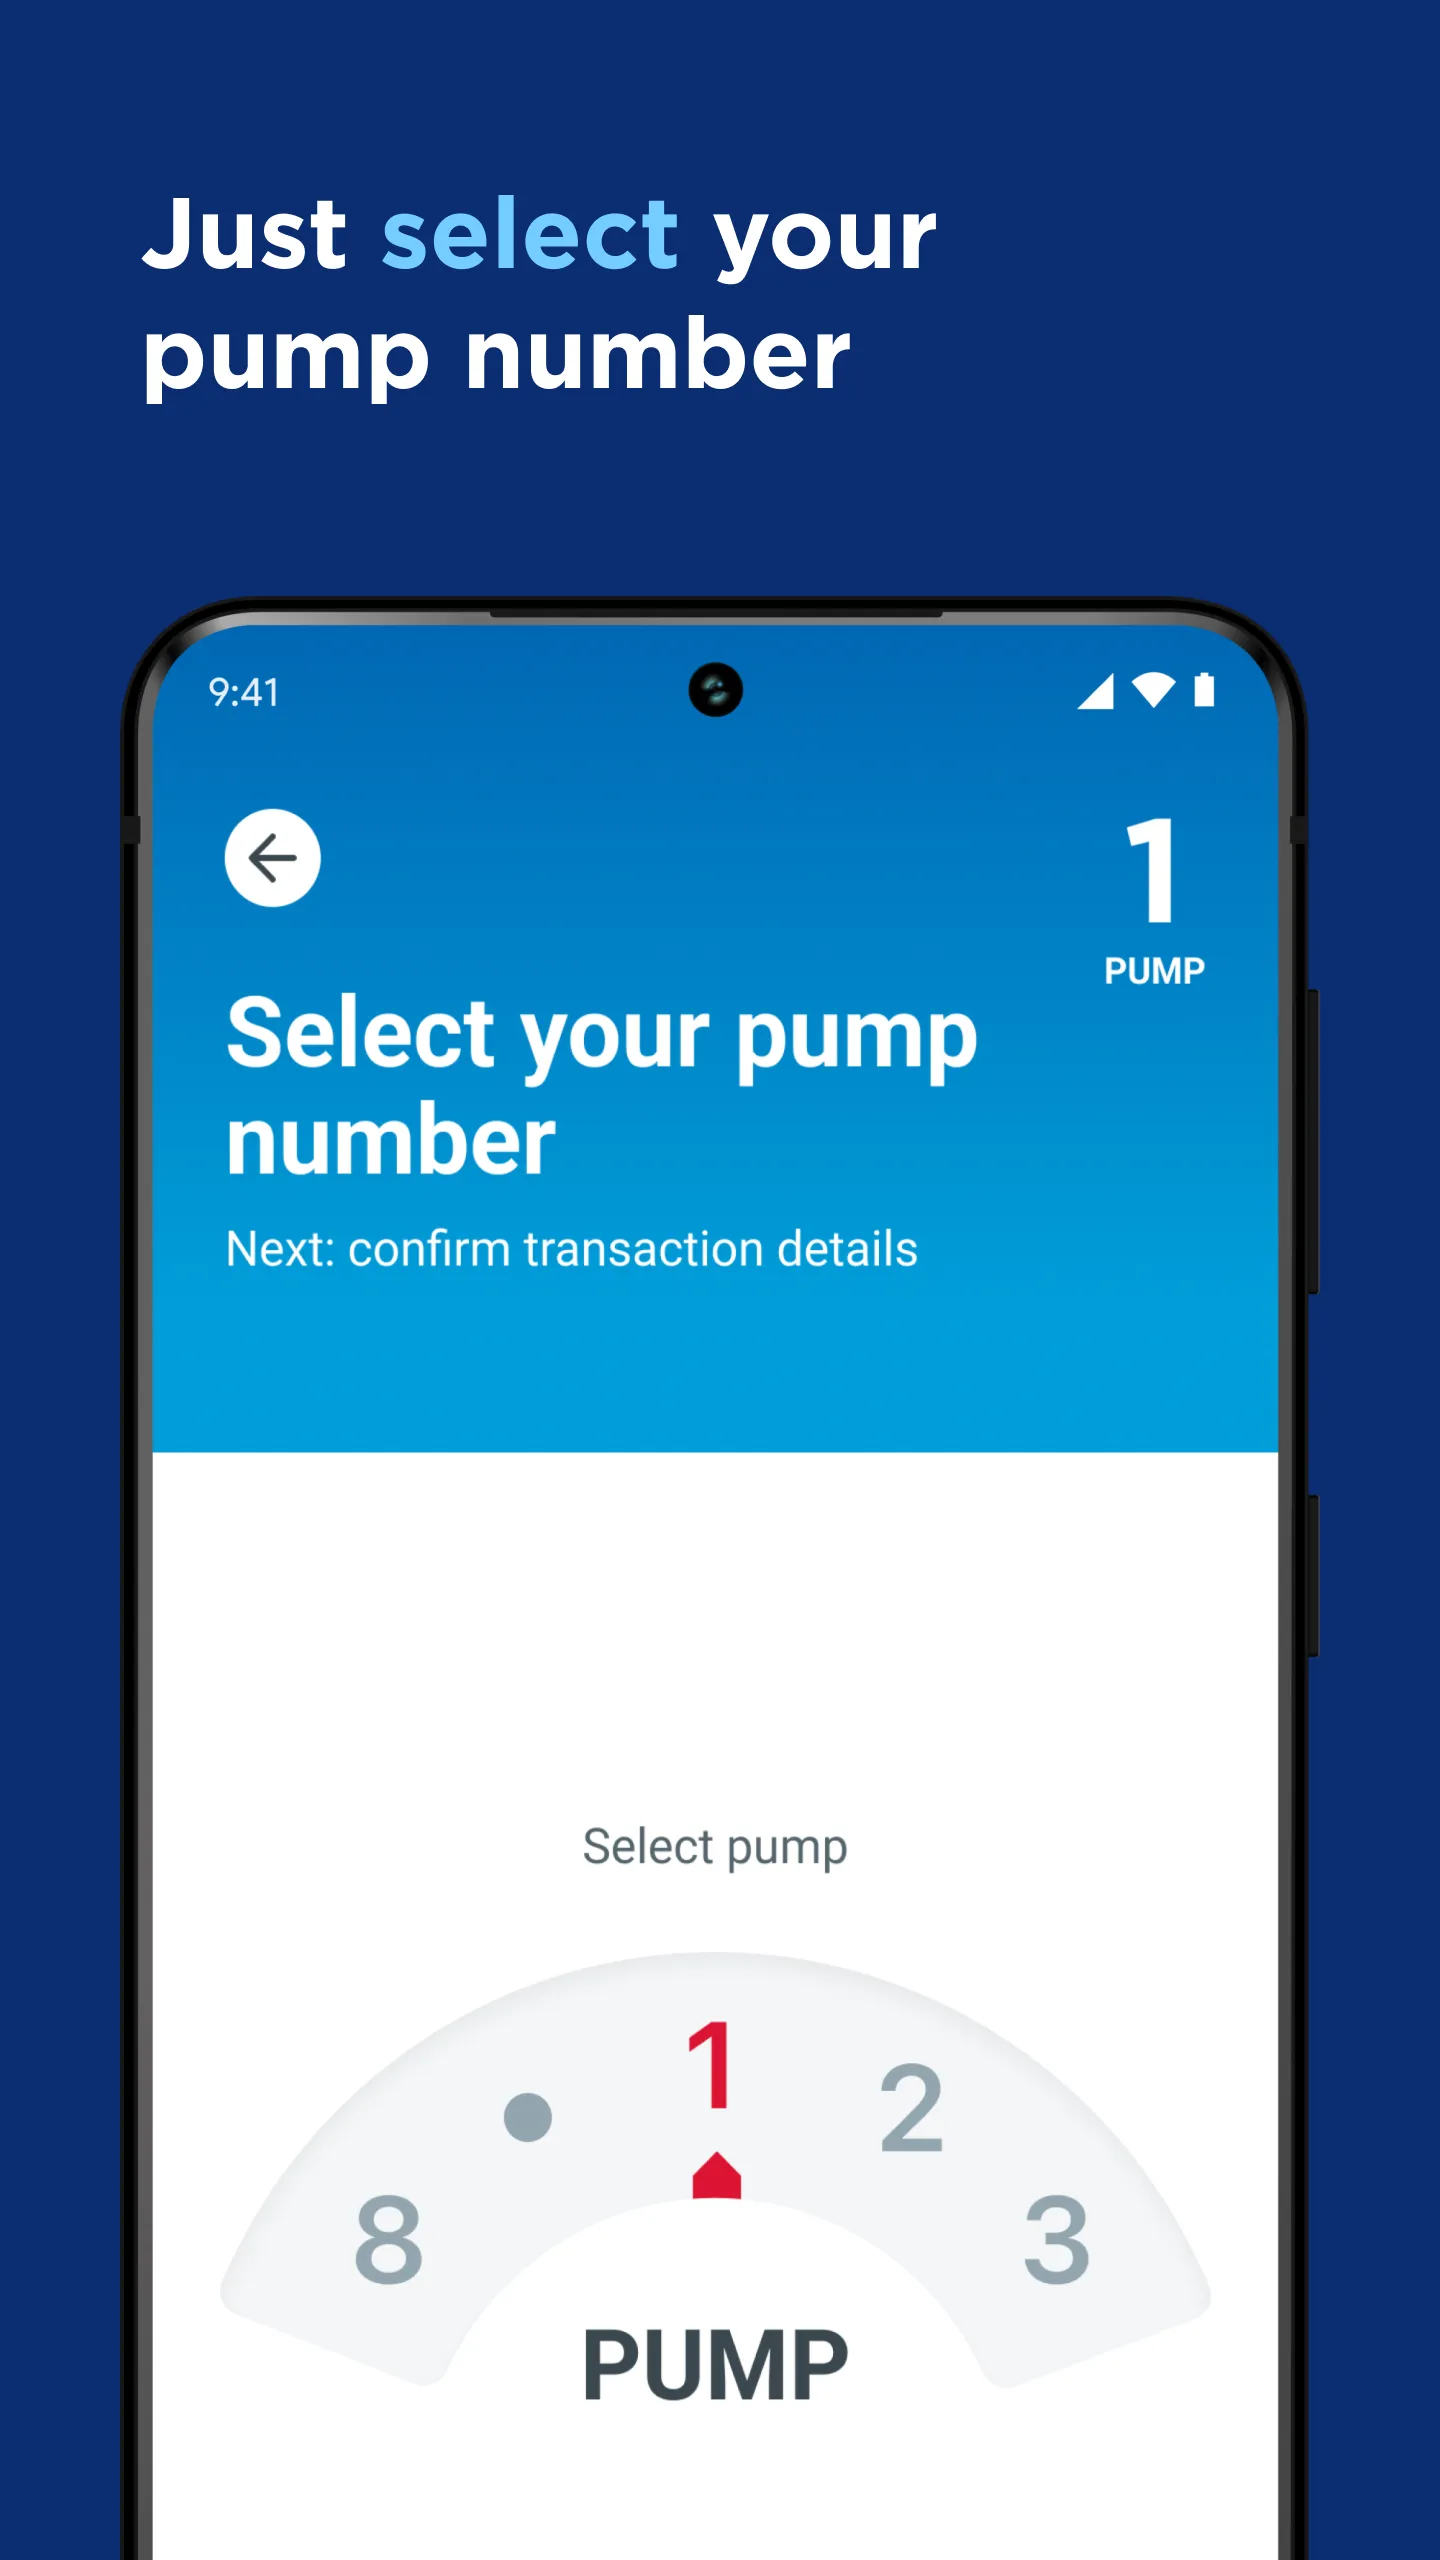 Choosing a pump to pay for in the Chevron mobile app